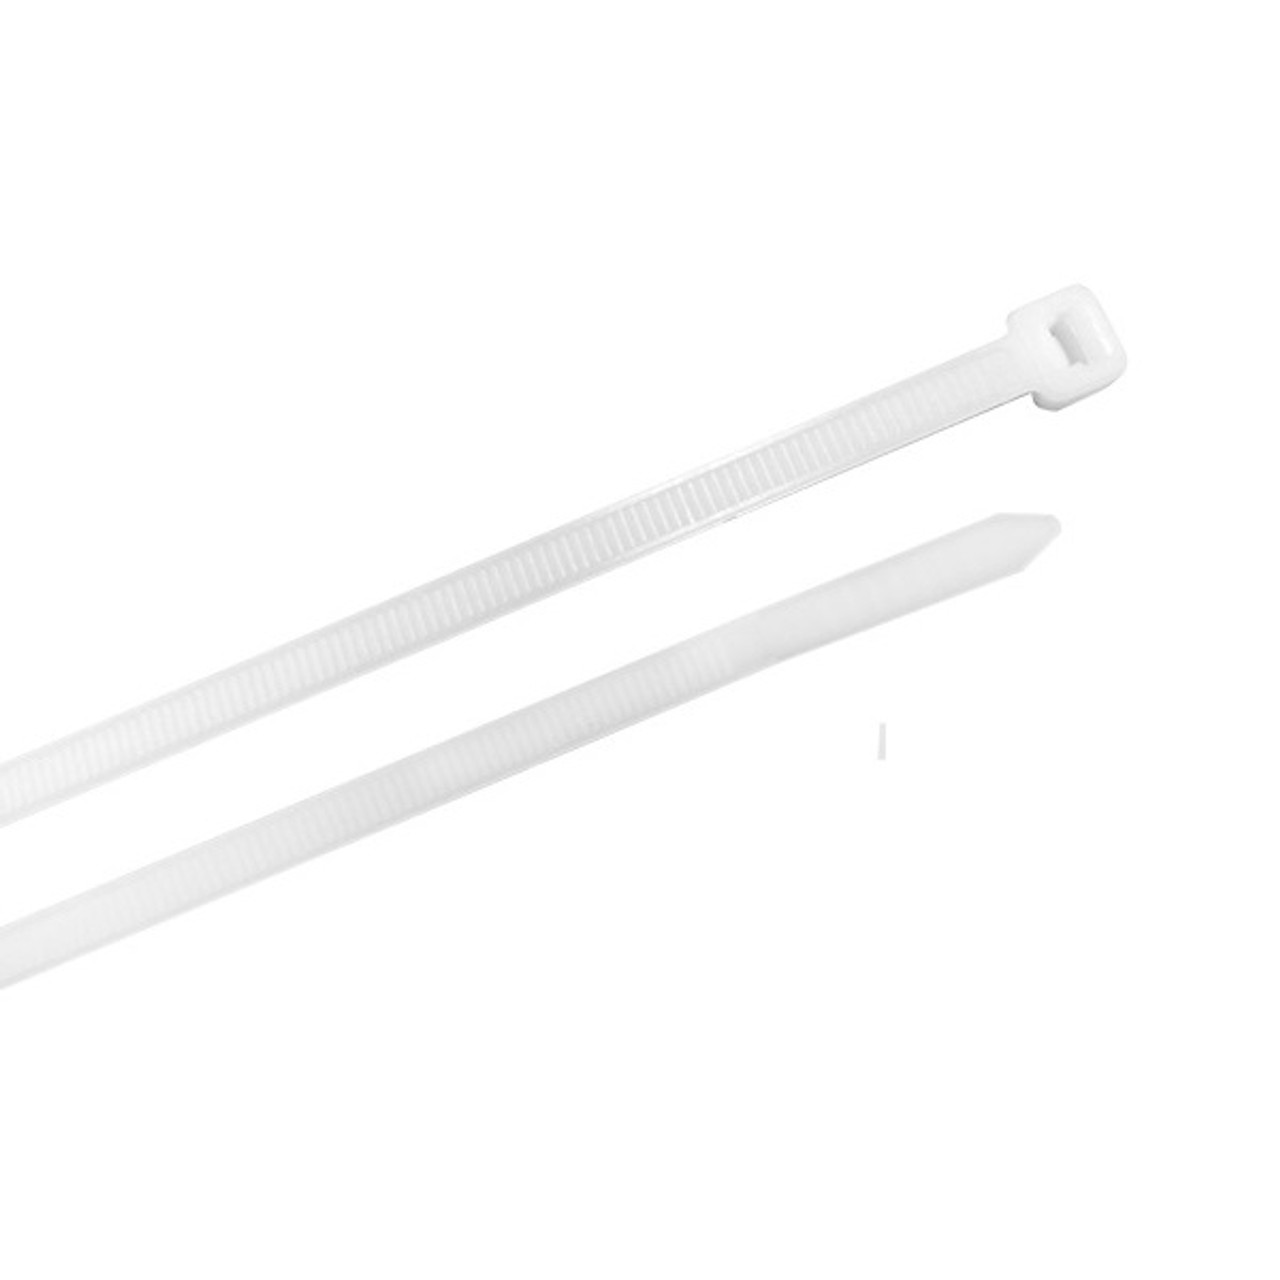 Stanley 4-Inch Multi-Purpose Cable Ties - White (Pack of 100)